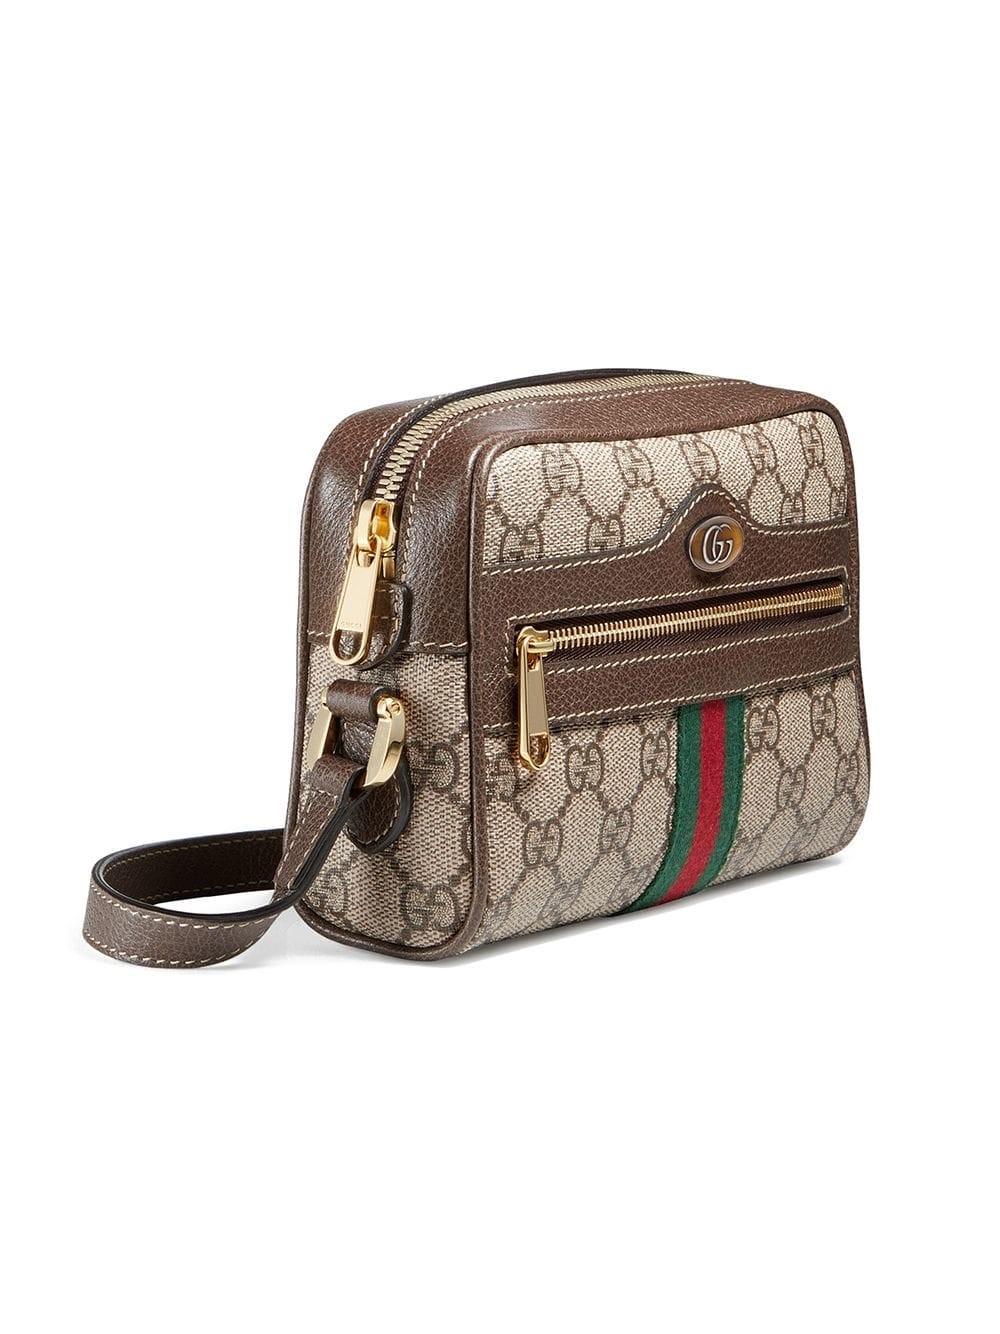 gucci OPHIDIA CROSS BODY BAG available on www.bagssaleusa.com - 27690